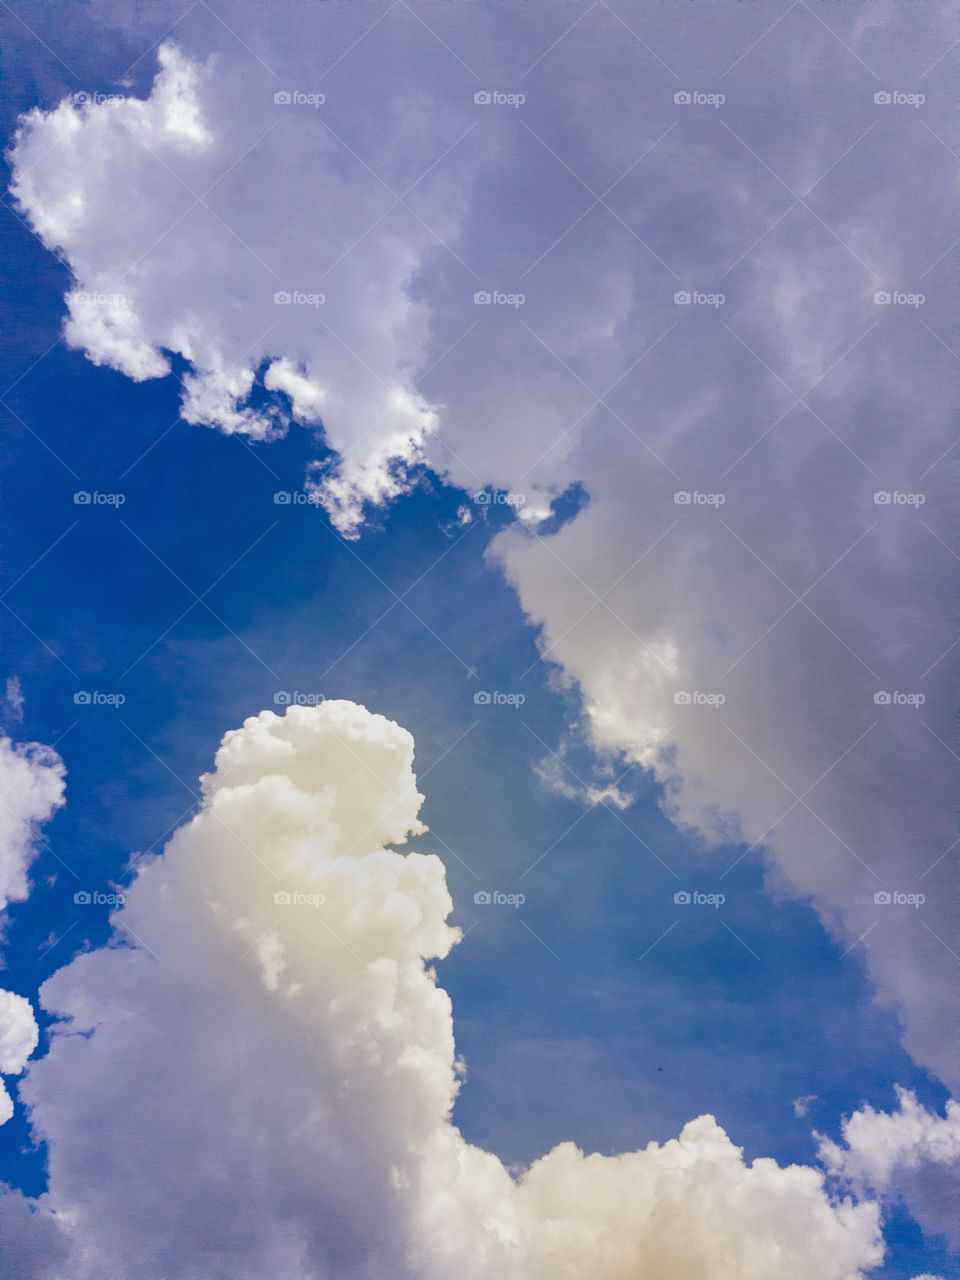 beautiful blue sky with cloud cover sunlight background.Sky clouds.Sky with clouds weather nature cloud blue